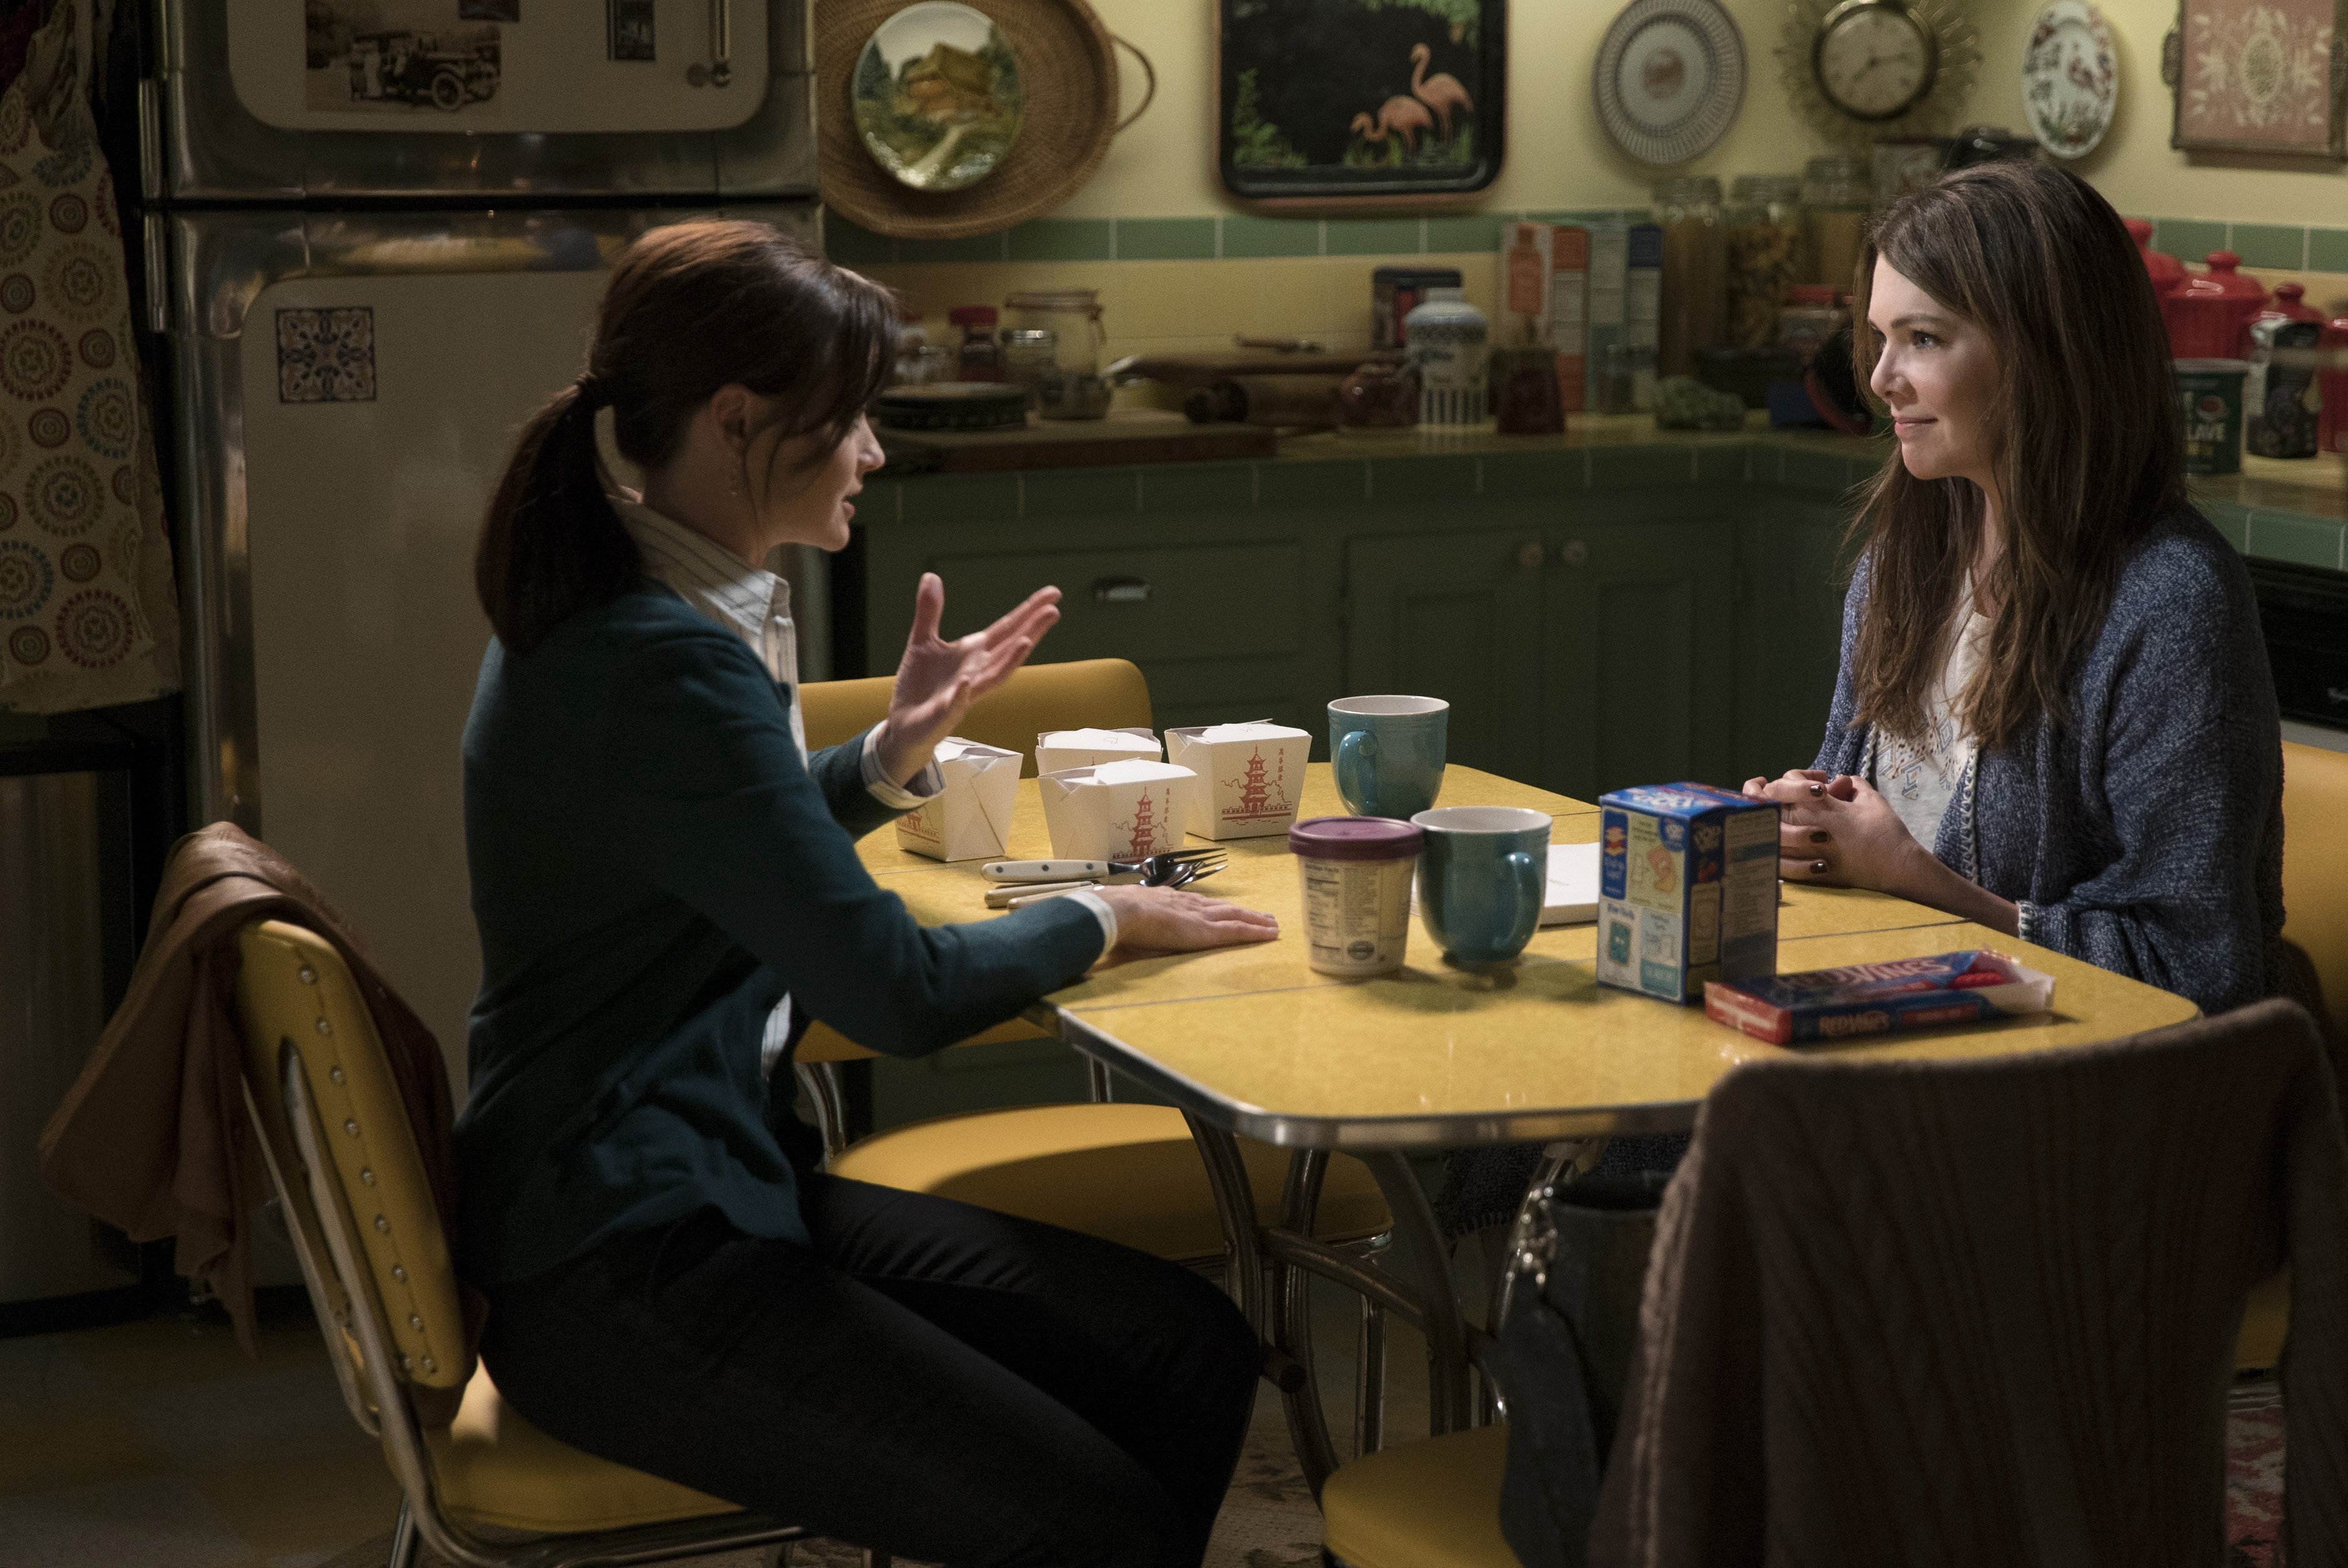 The decline and fall of the Gilmore girls